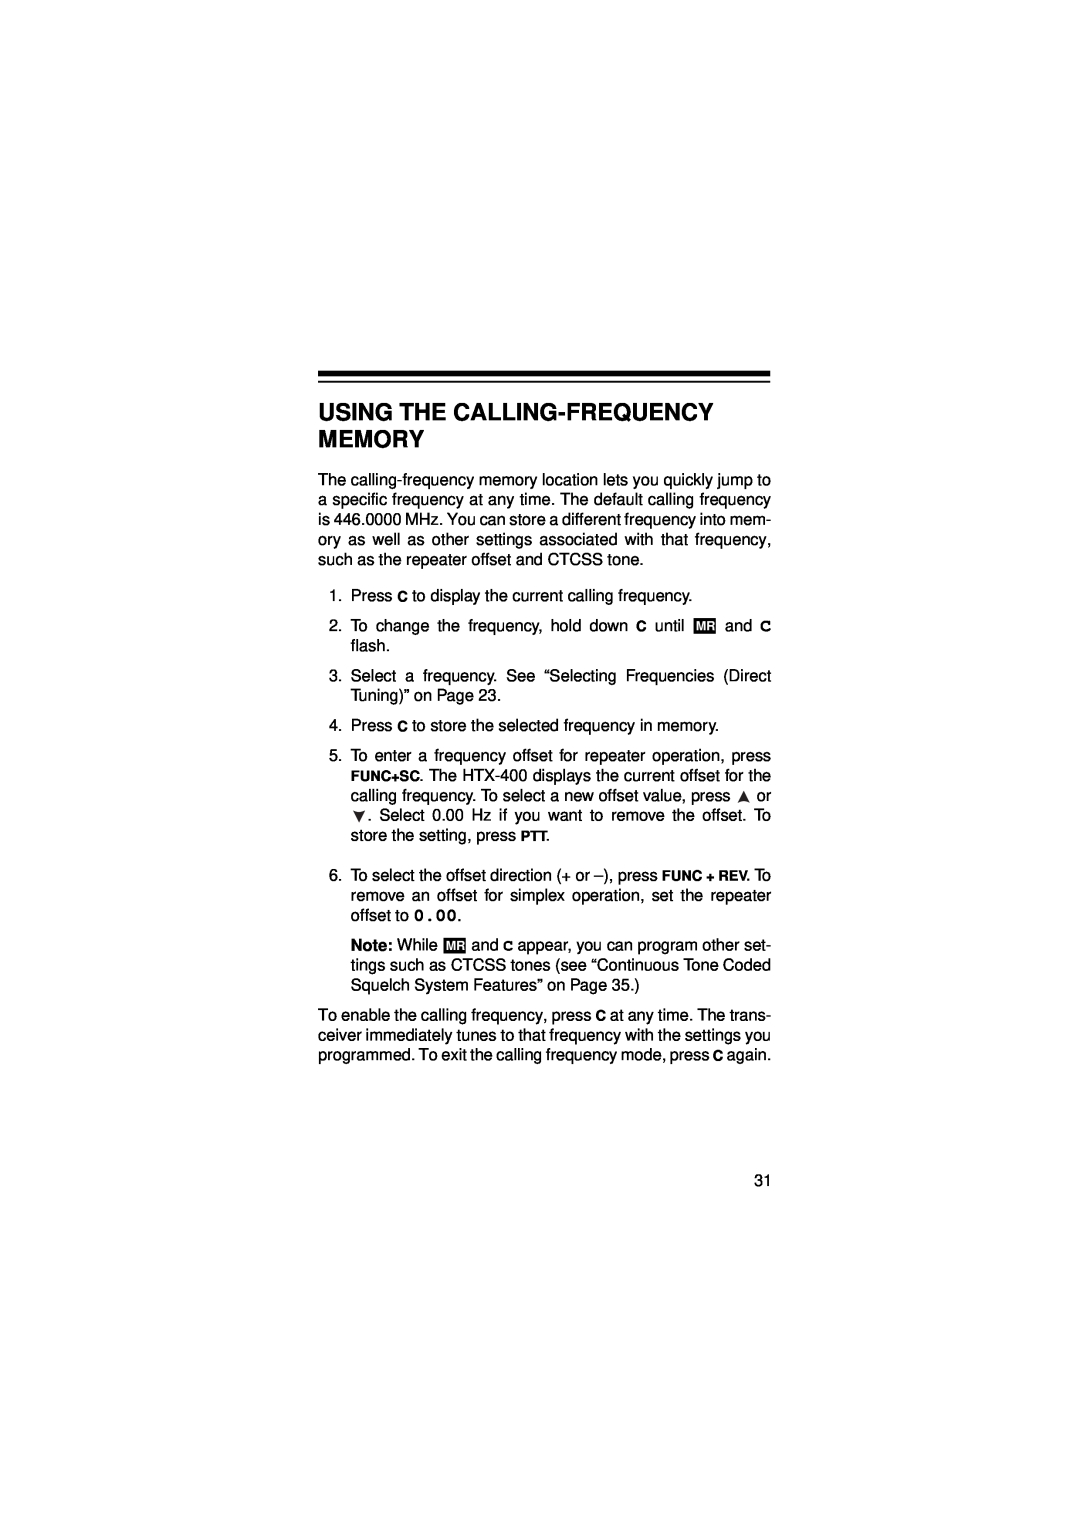 Radio Shack HTX-400 owner manual Using The Calling-Frequencymemory 